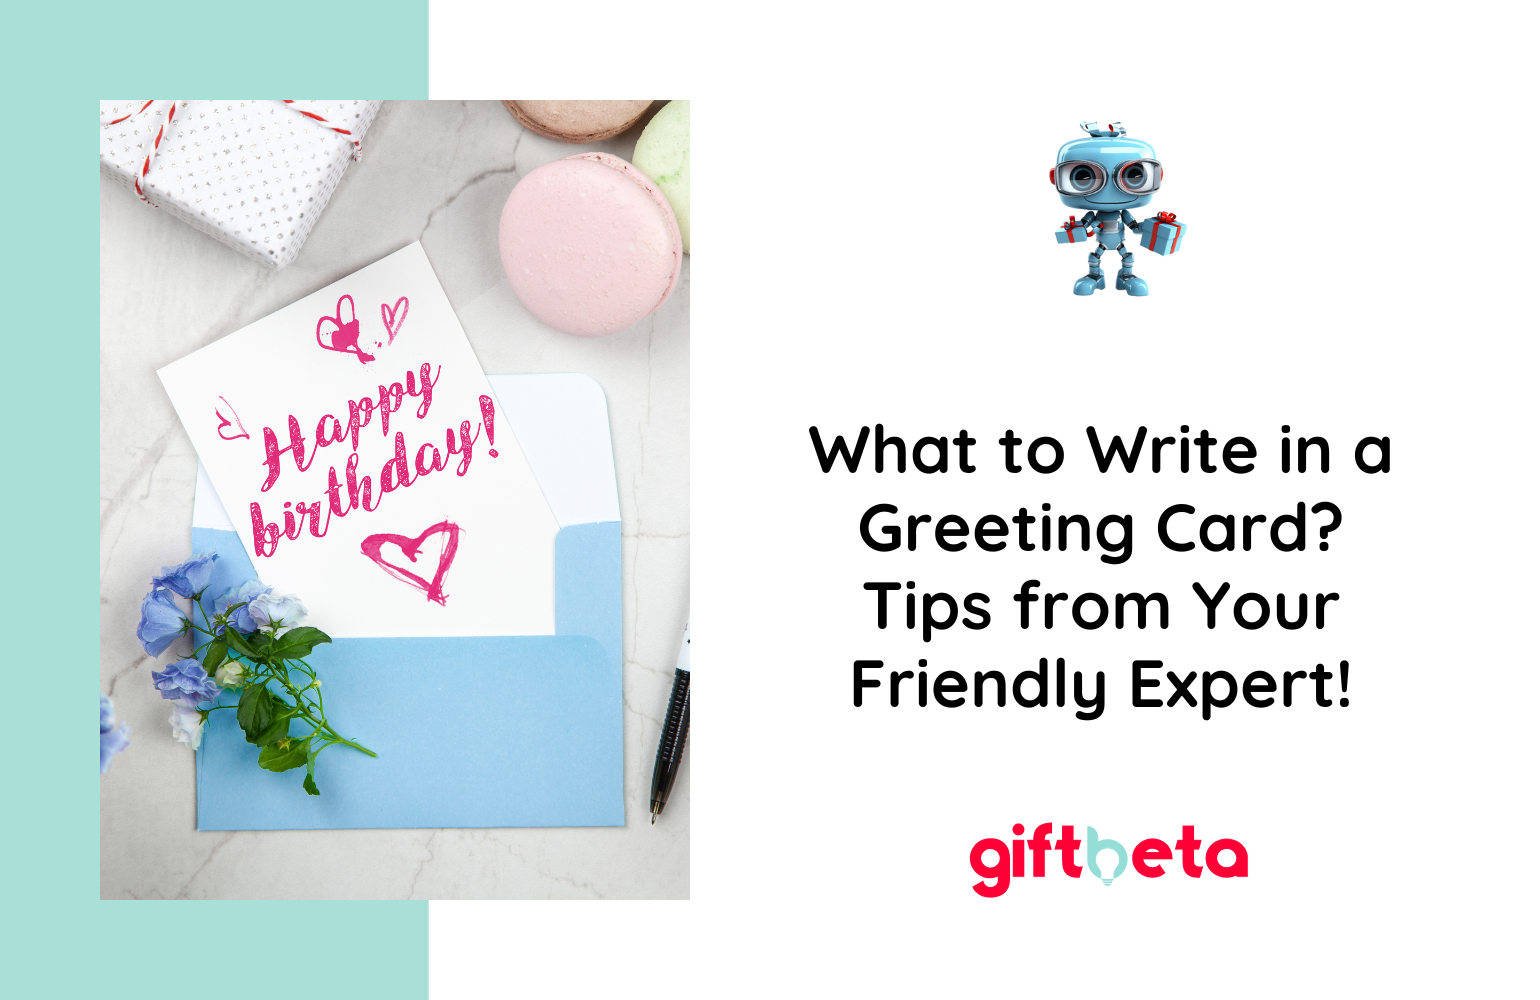 What to Write in a Greeting Card